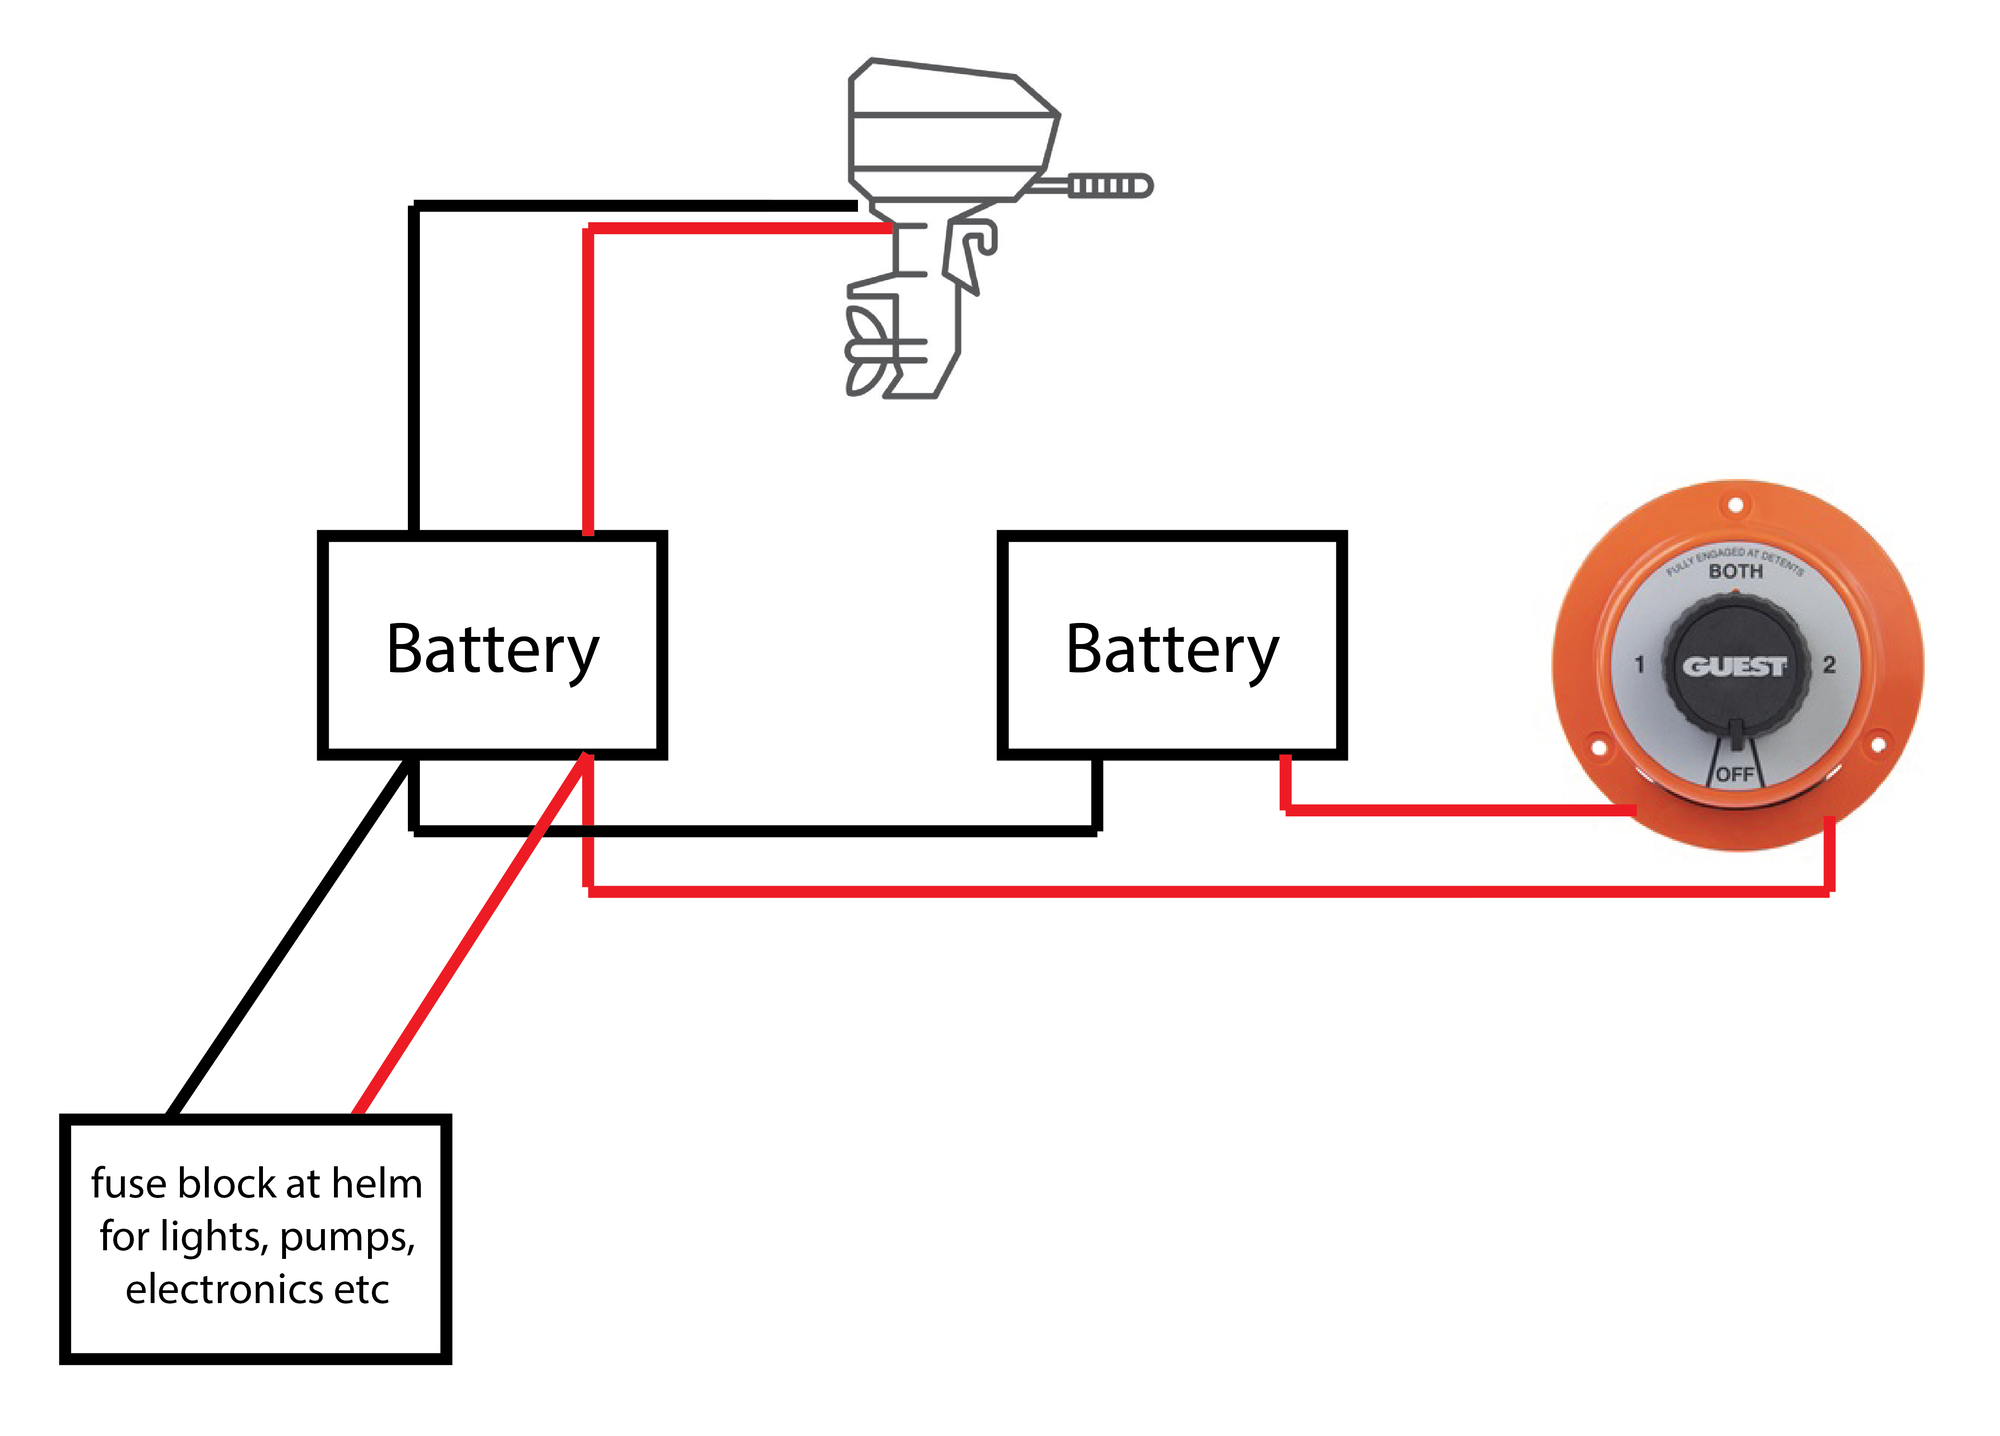 Battery Selector Switch Setup The